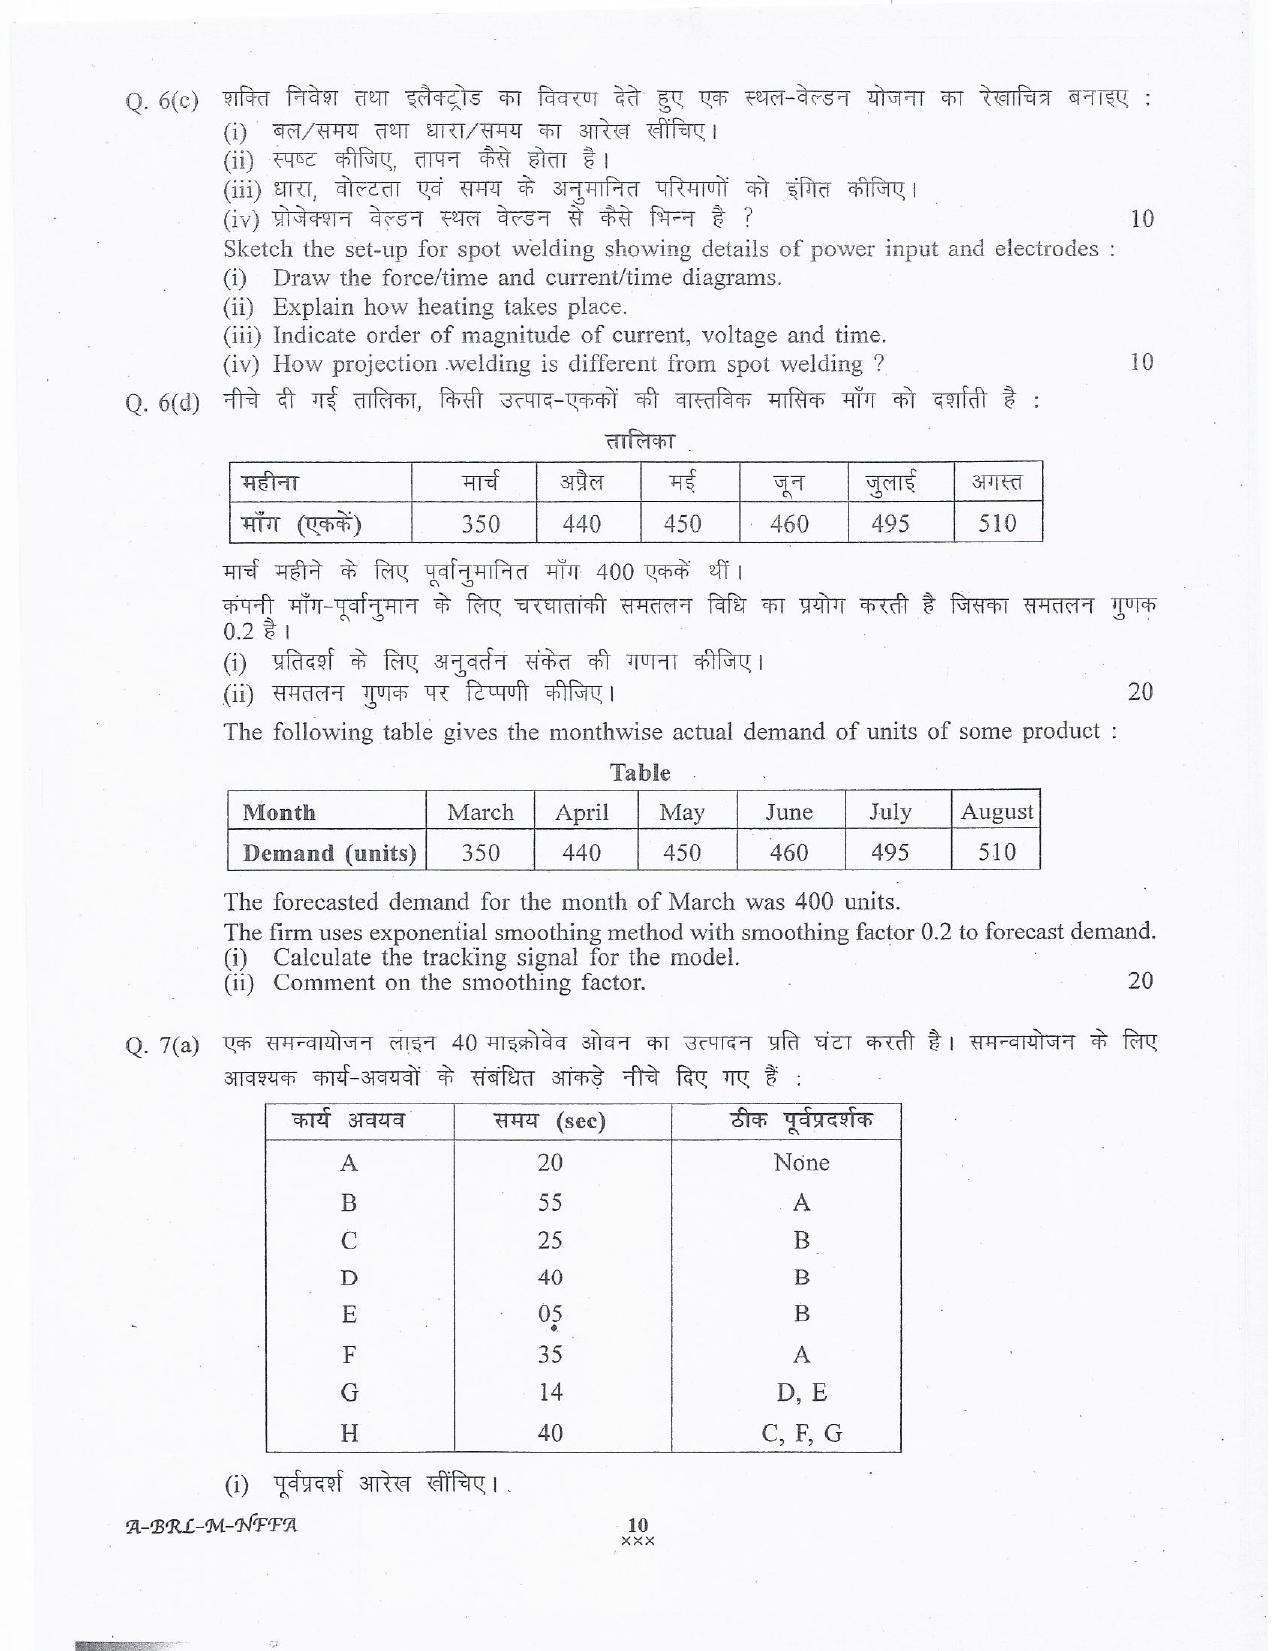 lakshadweep.gov.in Mechanical Engineering Question Papers - Page 10